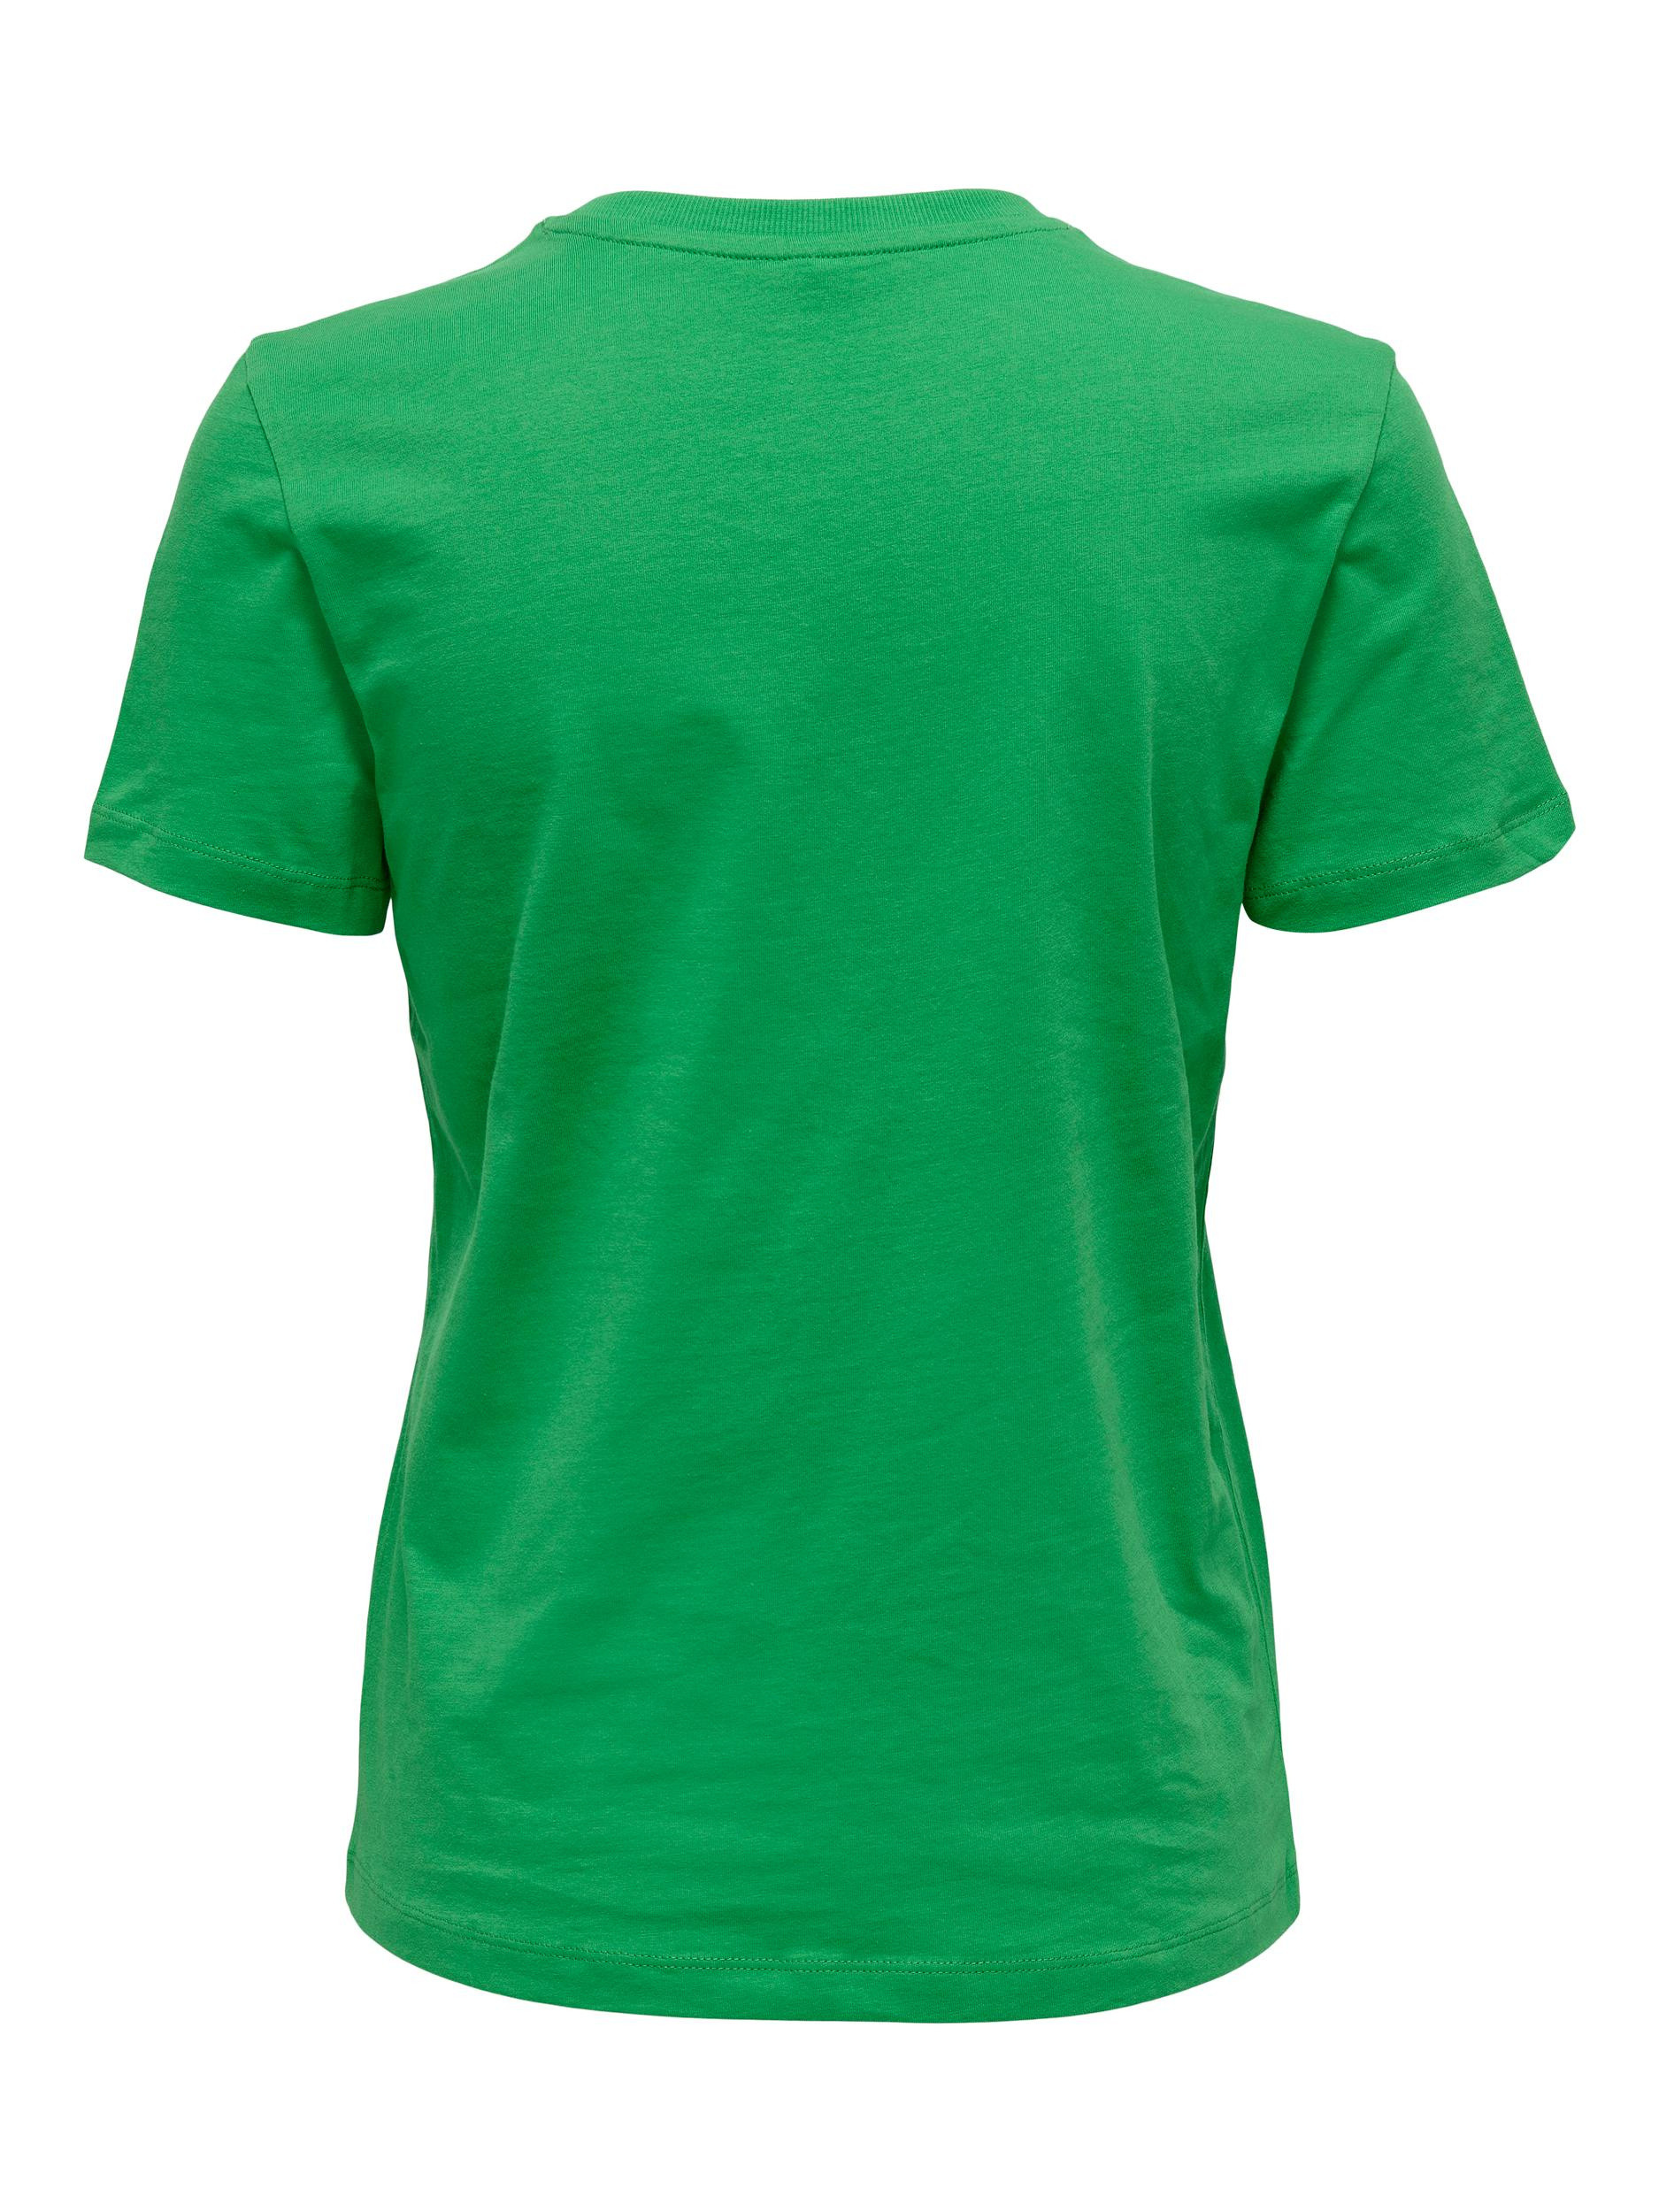 Only - Regular fit T-shirt with print, Green, large image number 1